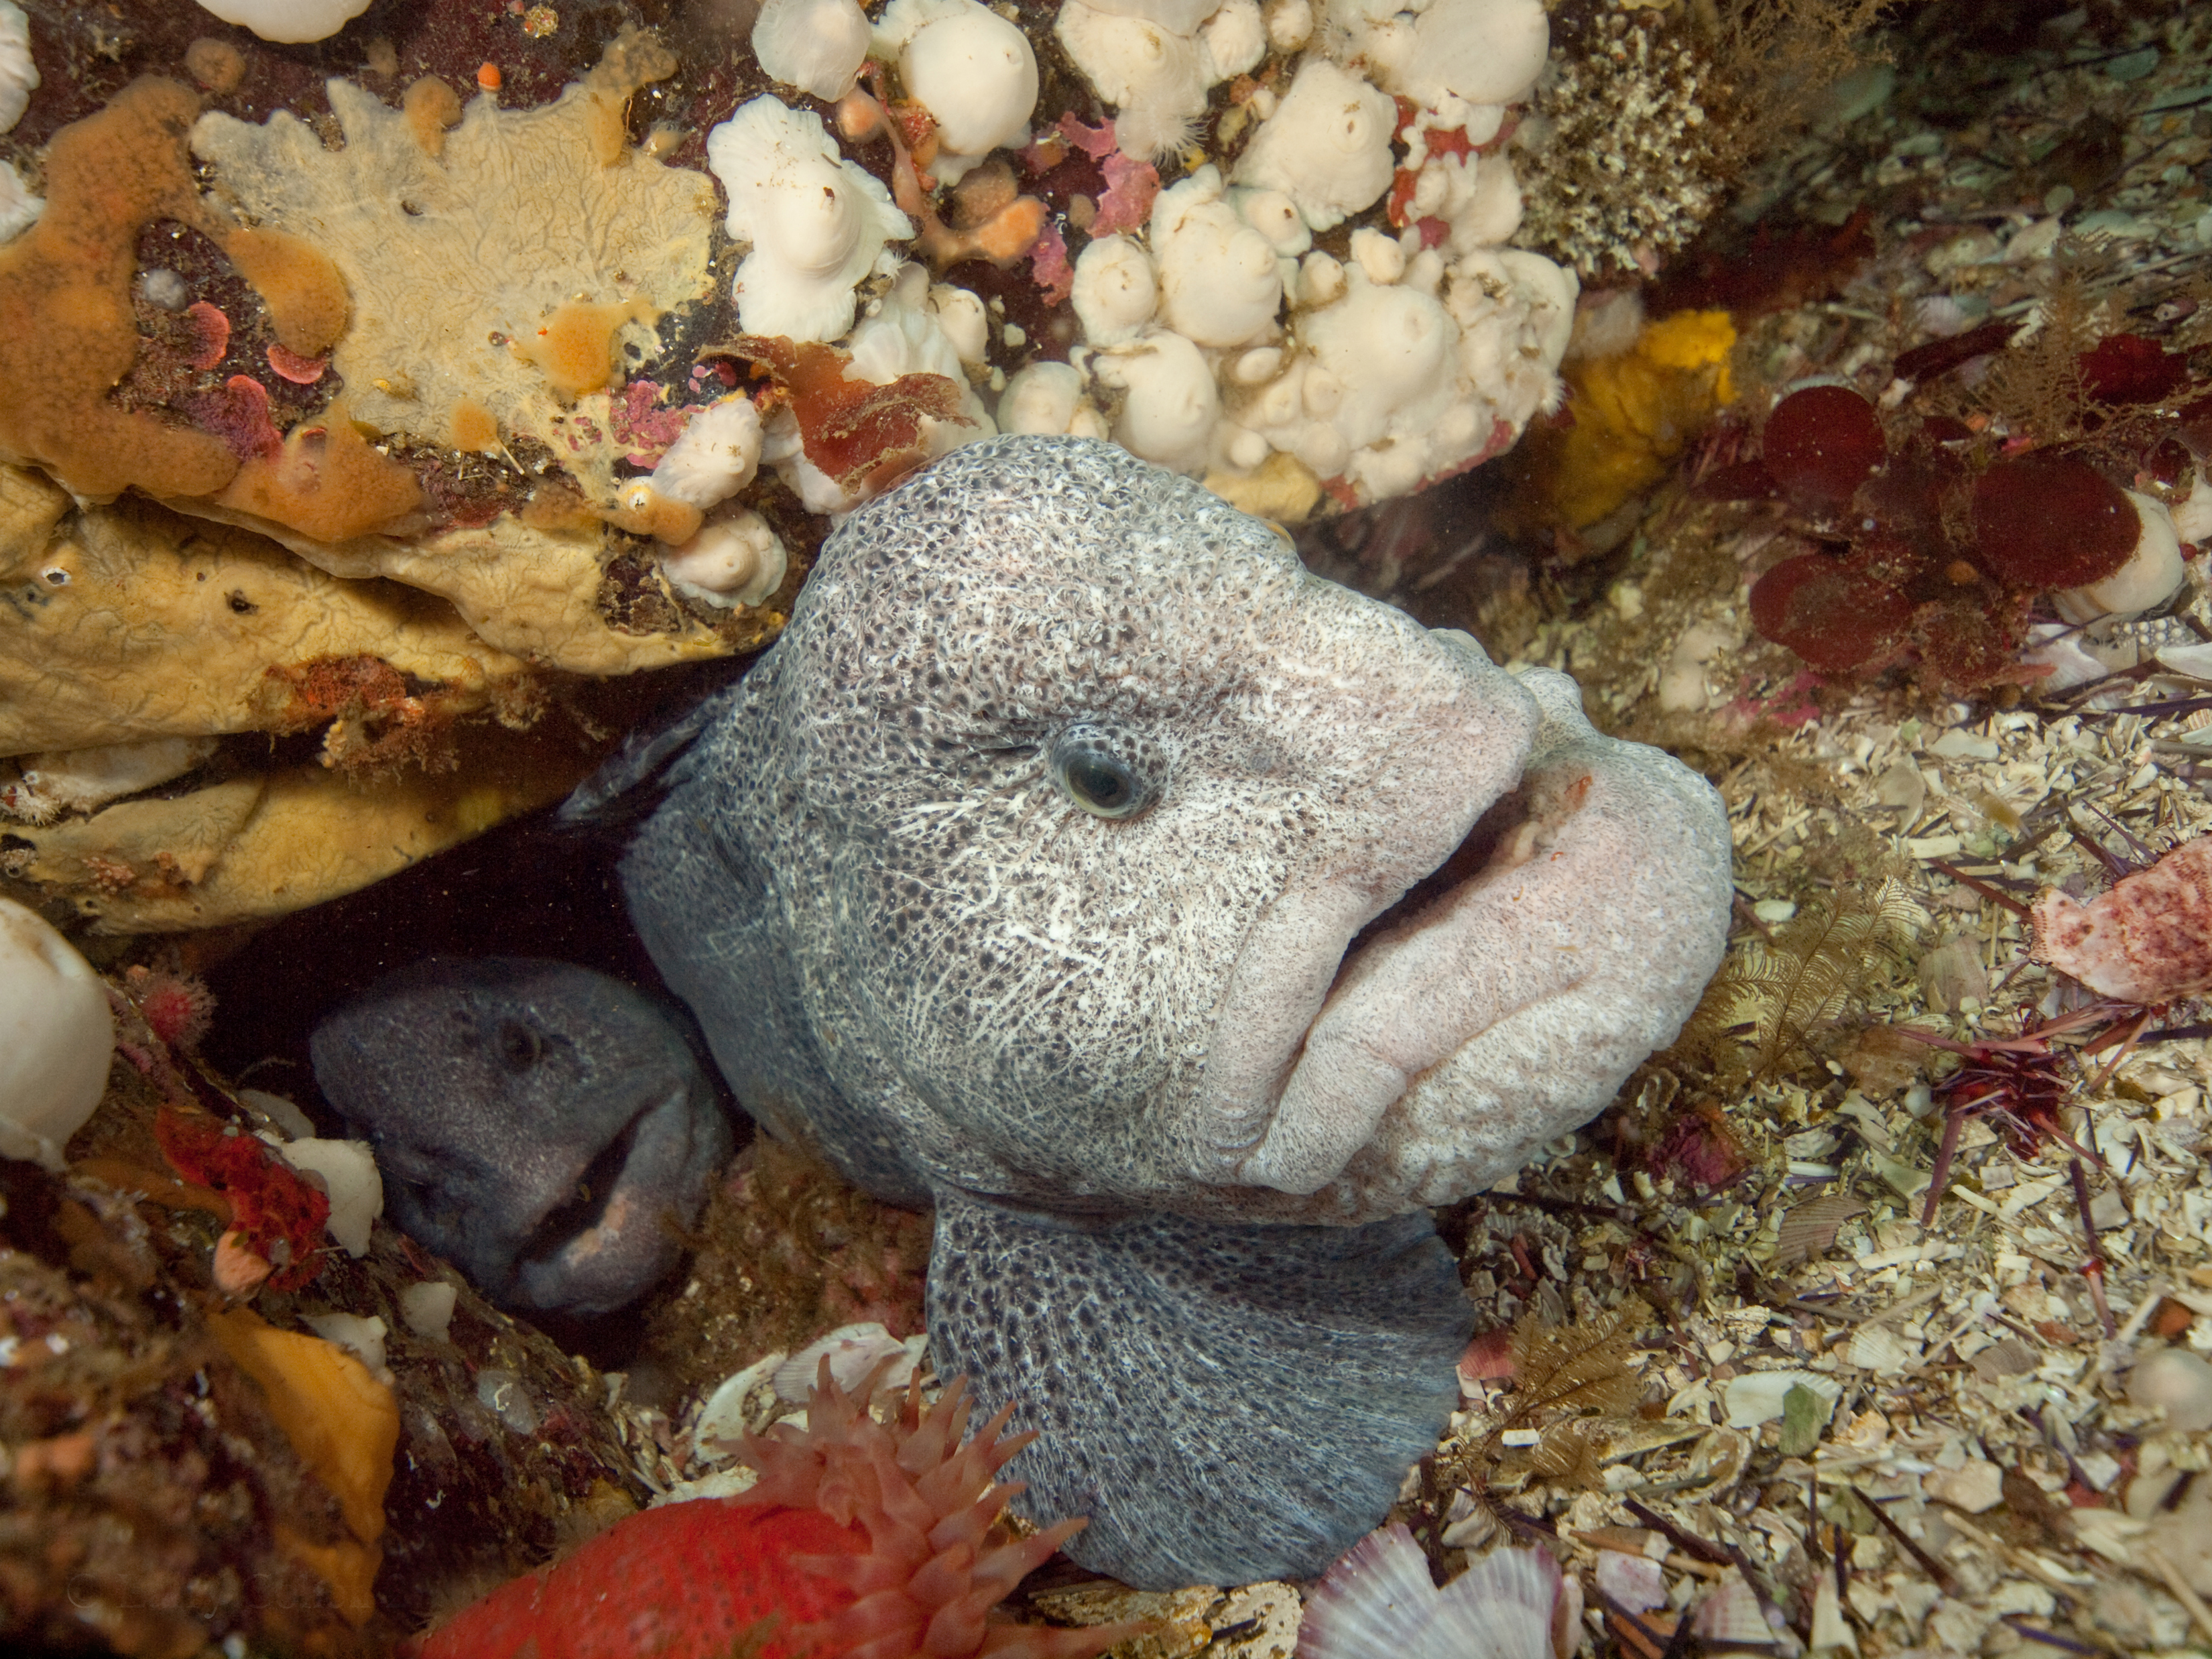 Wolf eels, British Columbia, Canada. Photo by Larry Cohen